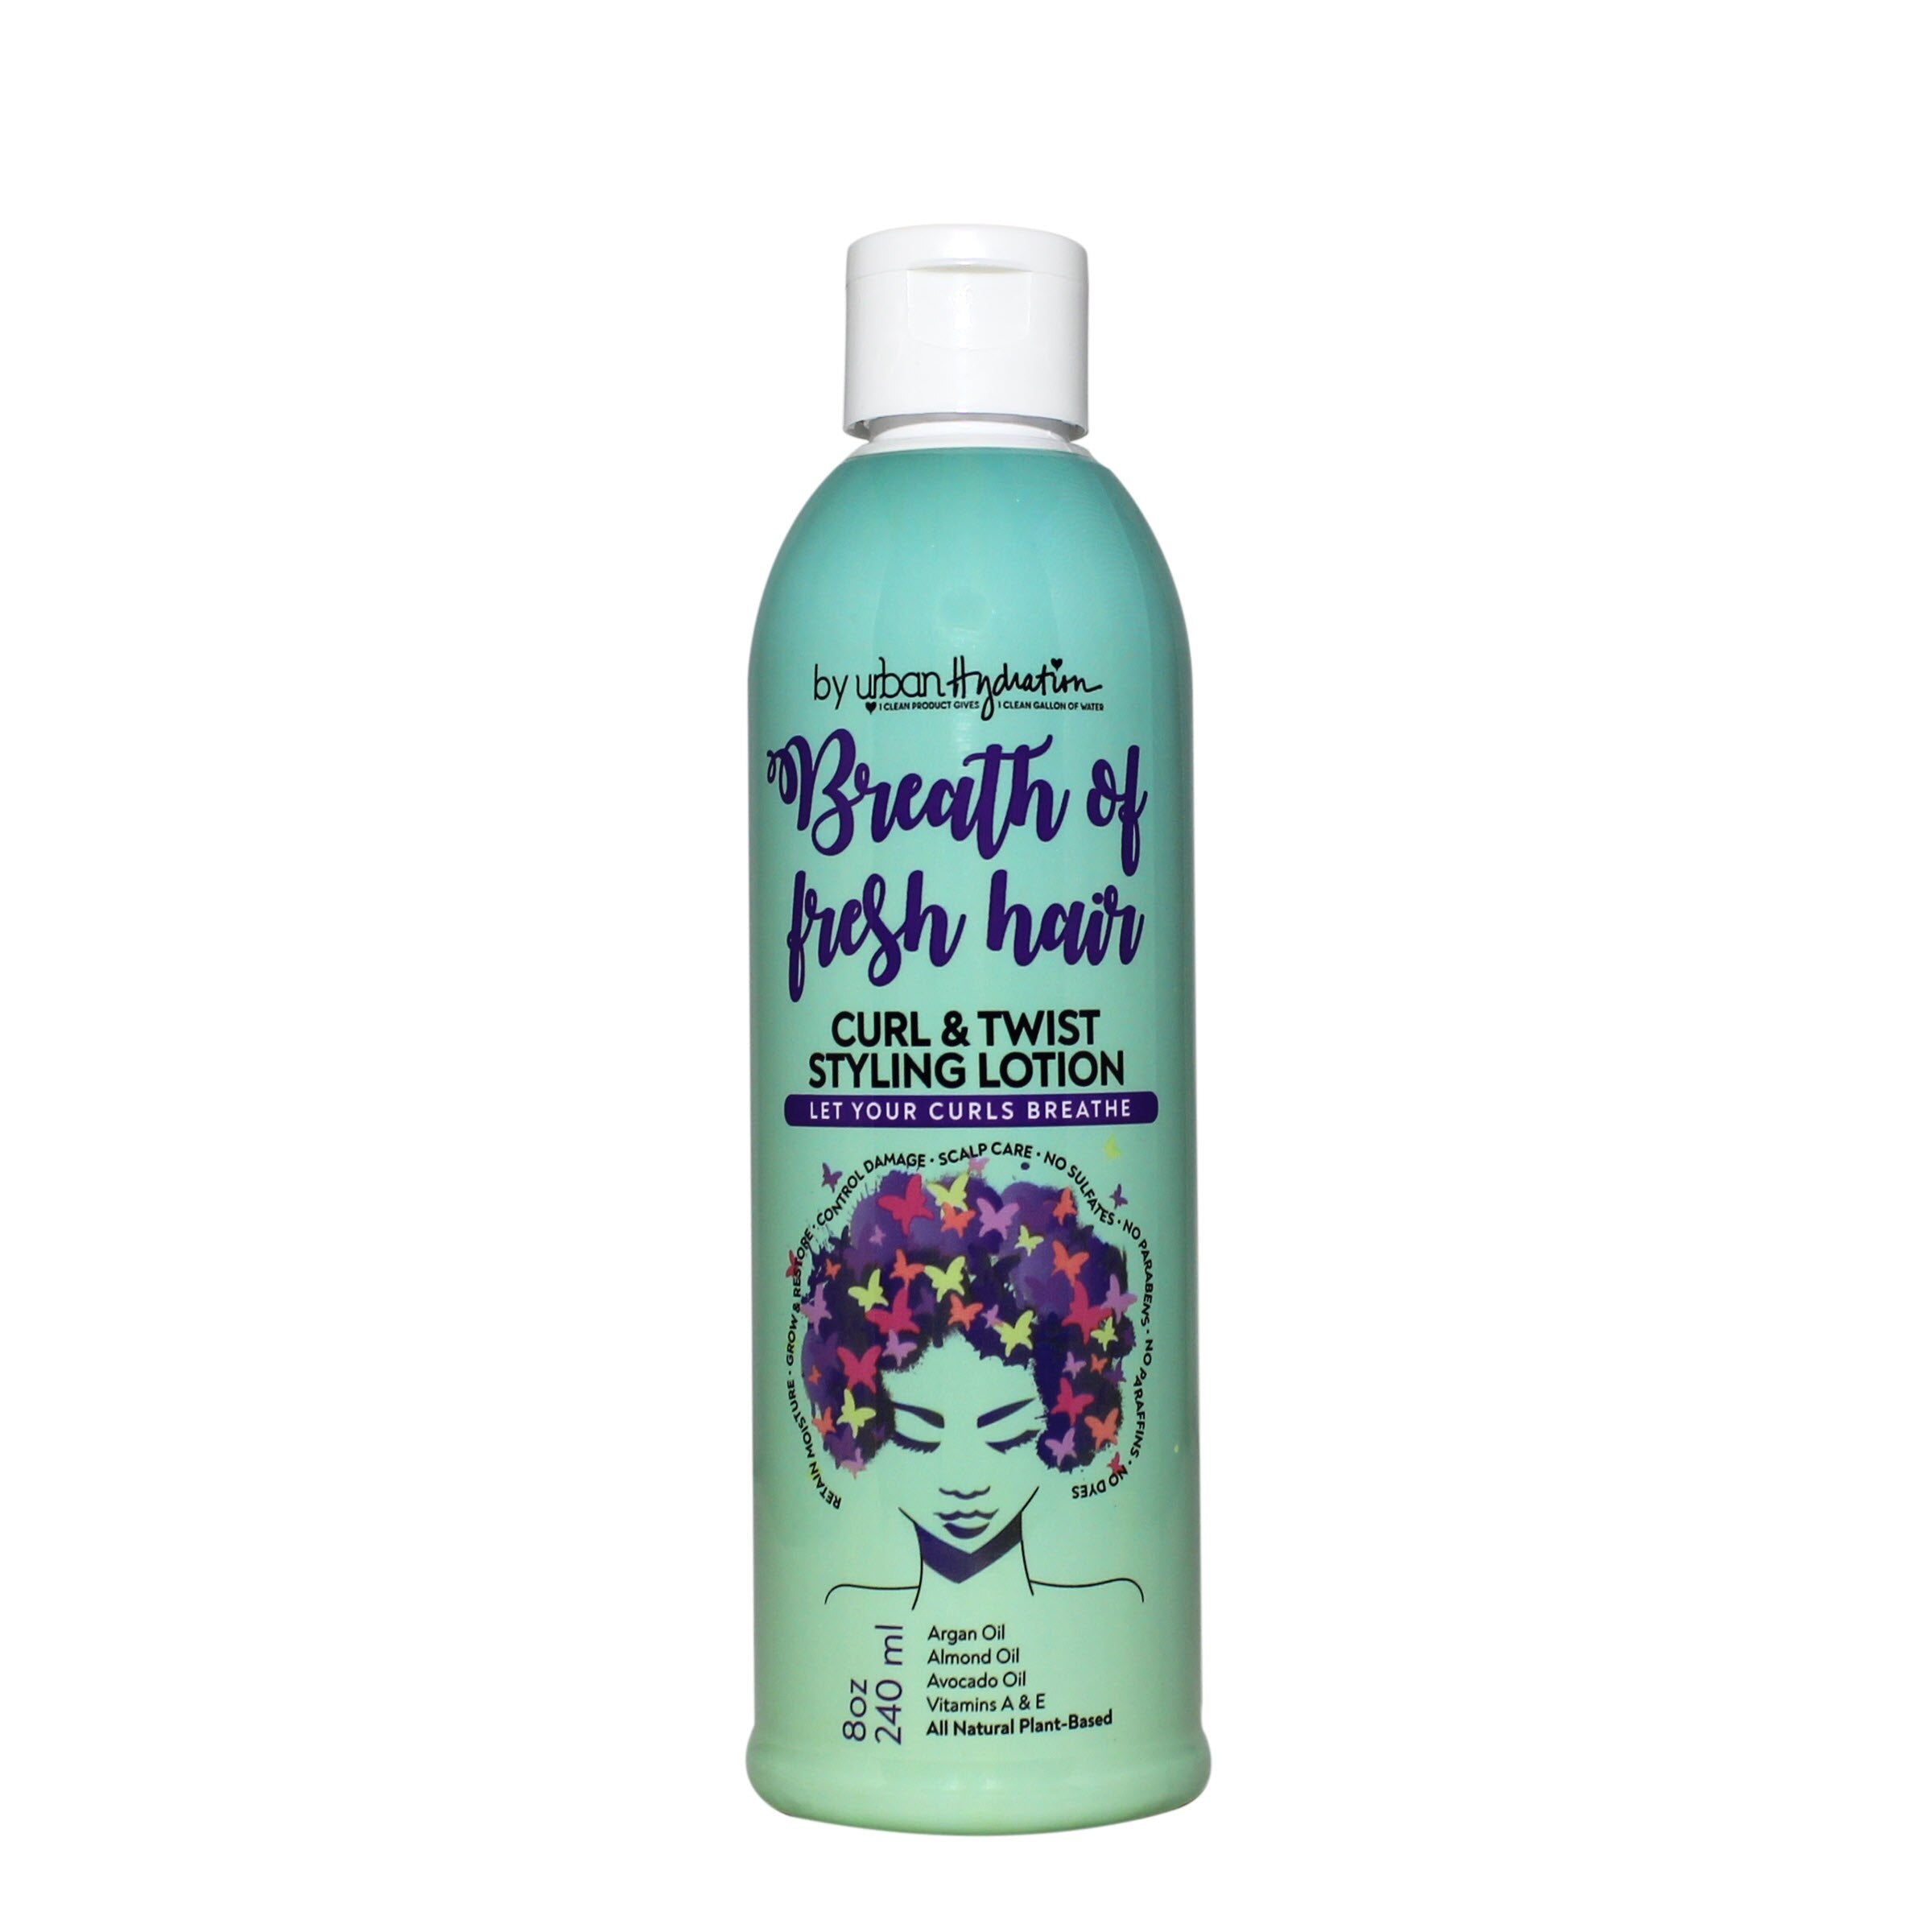 OF FRESH HAIR URBAN HYDRATION Curl & Twist Styling – COCOTIQUE